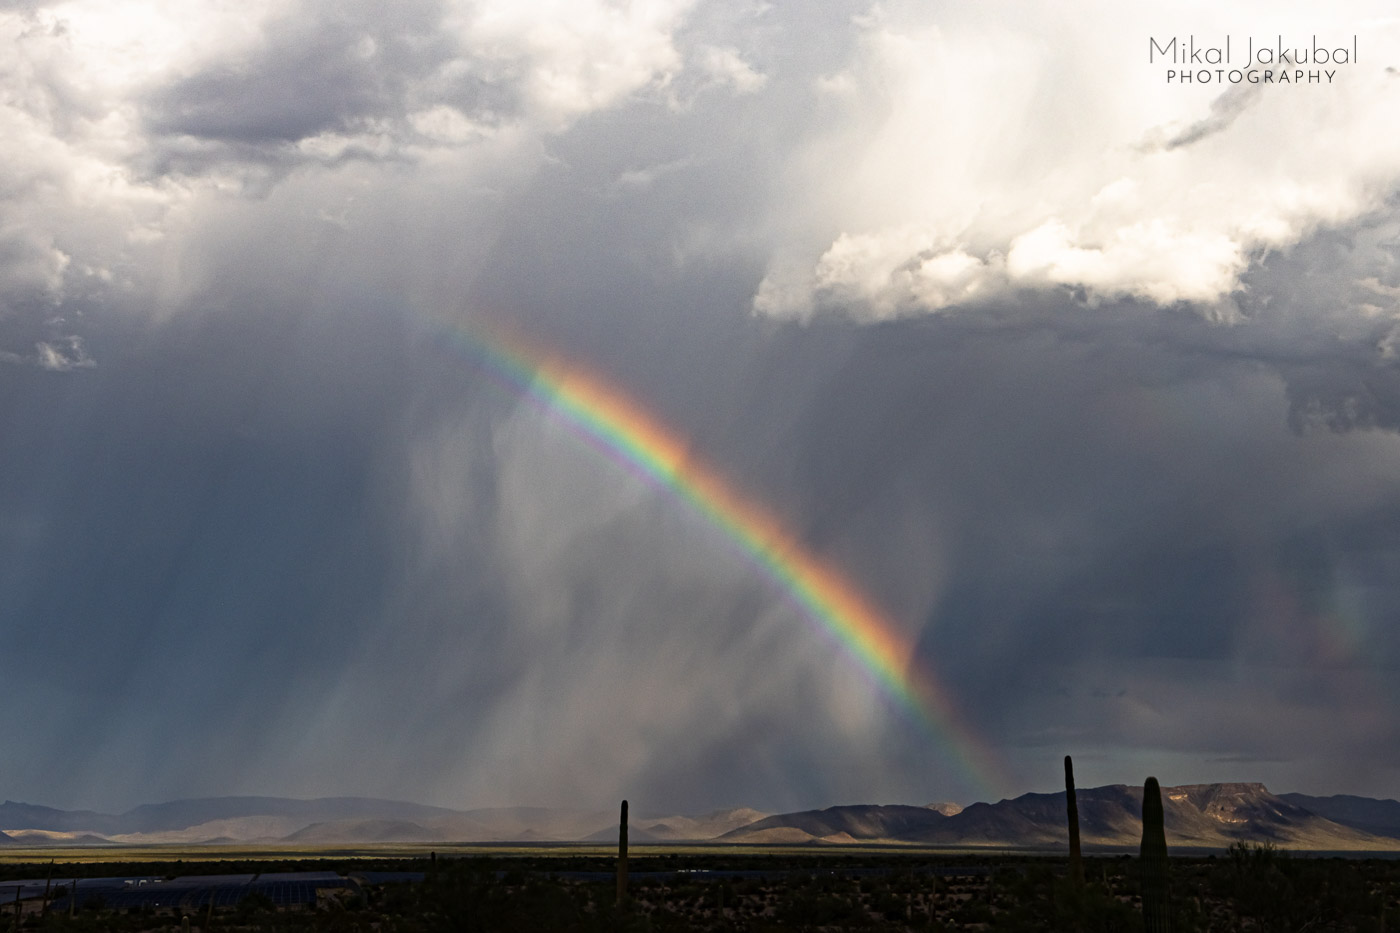 A rainbow arched down into the desert below white and gray storm clouds.